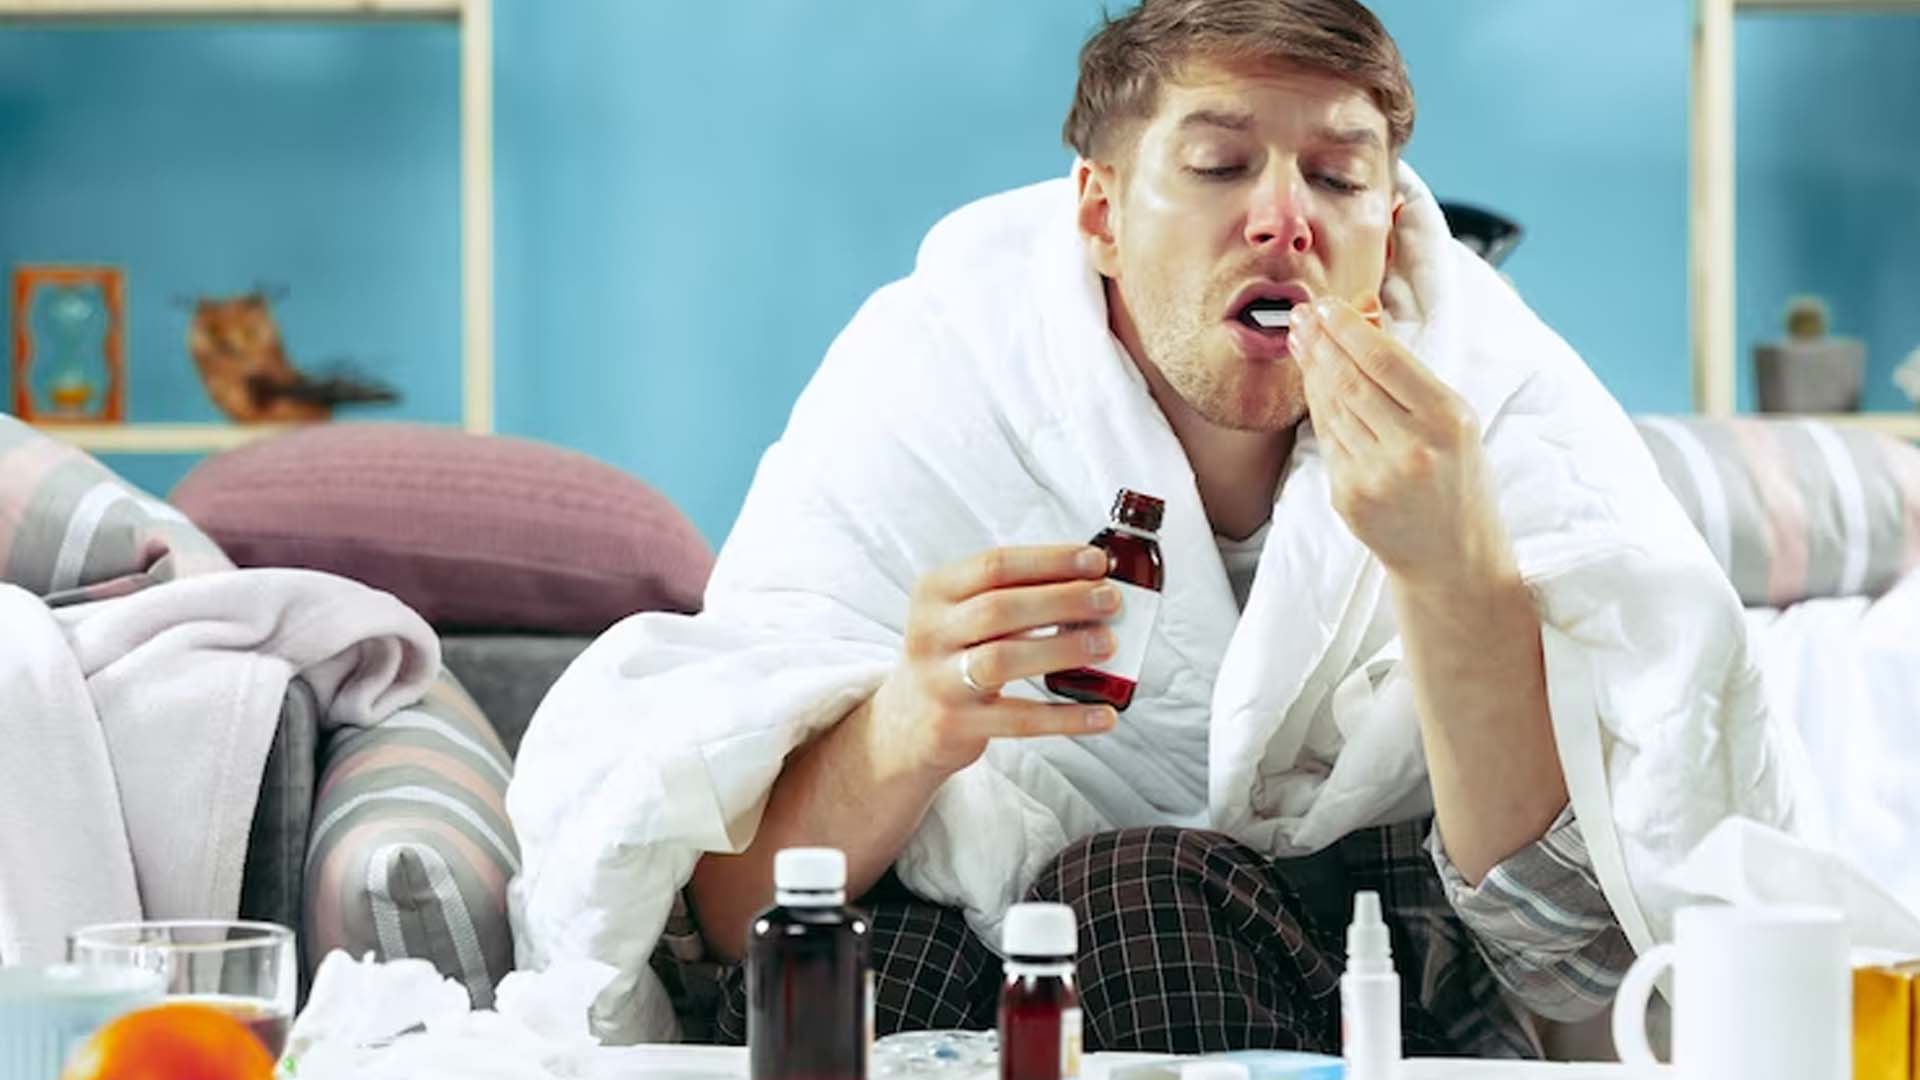 Can Cough Syrup Cause Death?